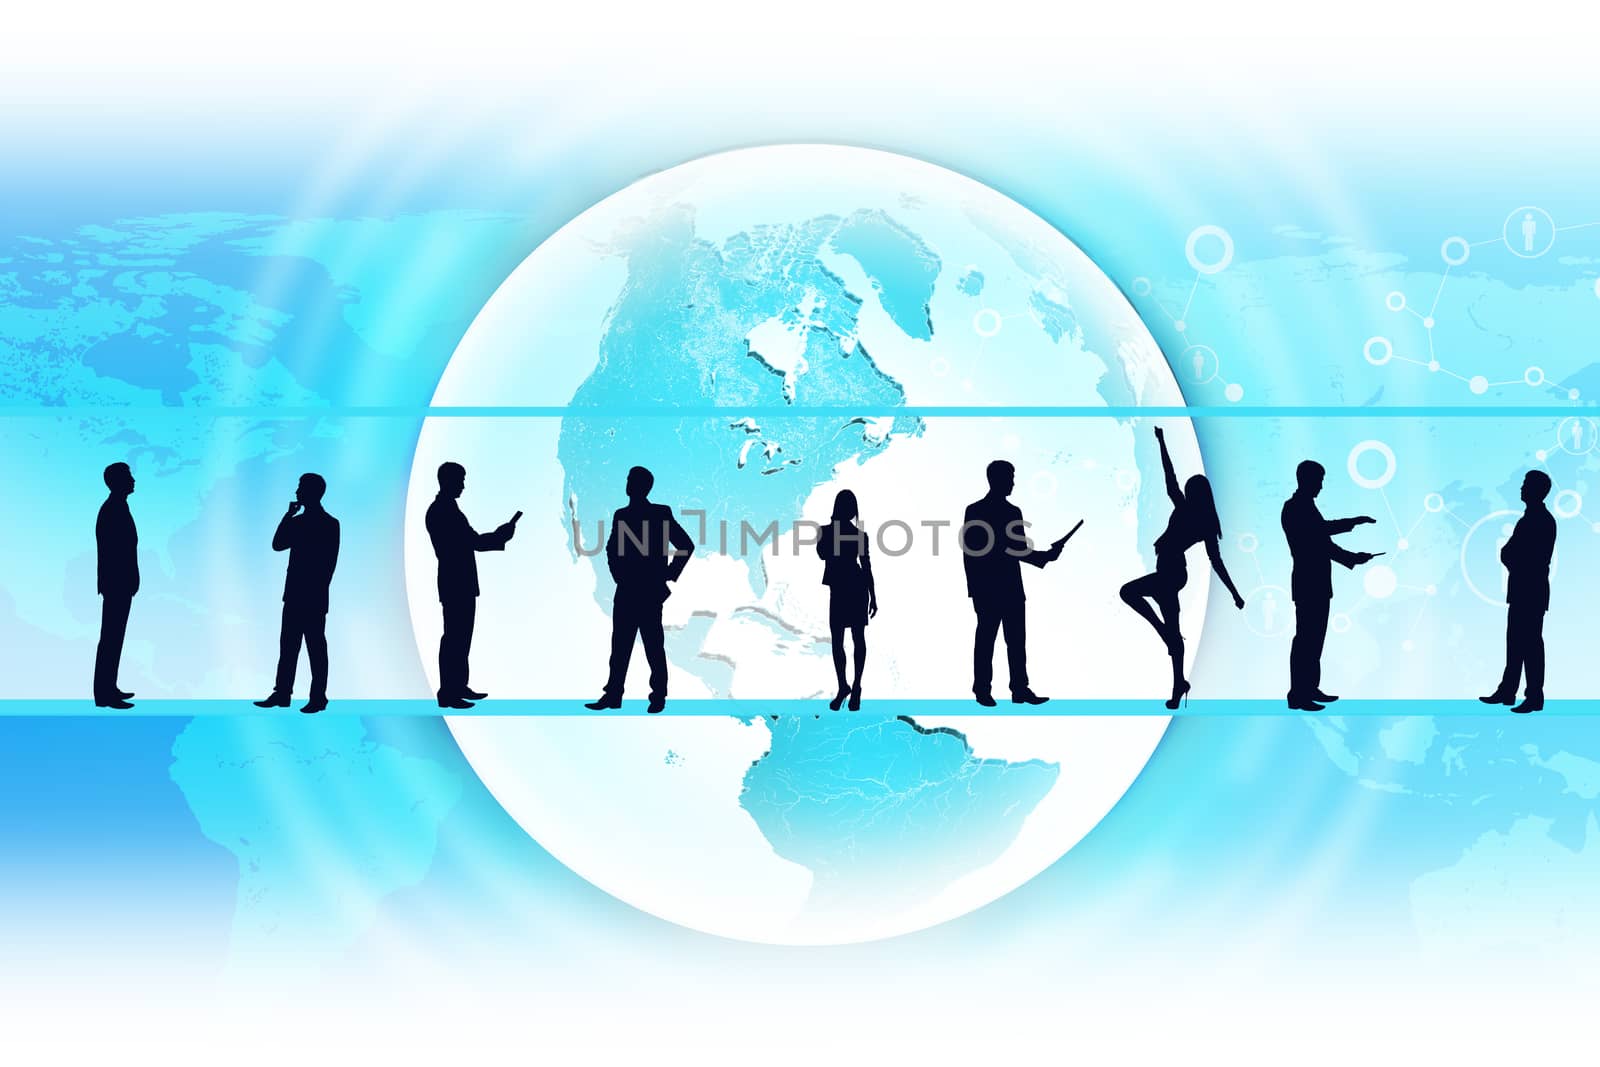 Silhouettes of business people in different postures on abstract blue background with earth. Elements of this image furnished by NASA